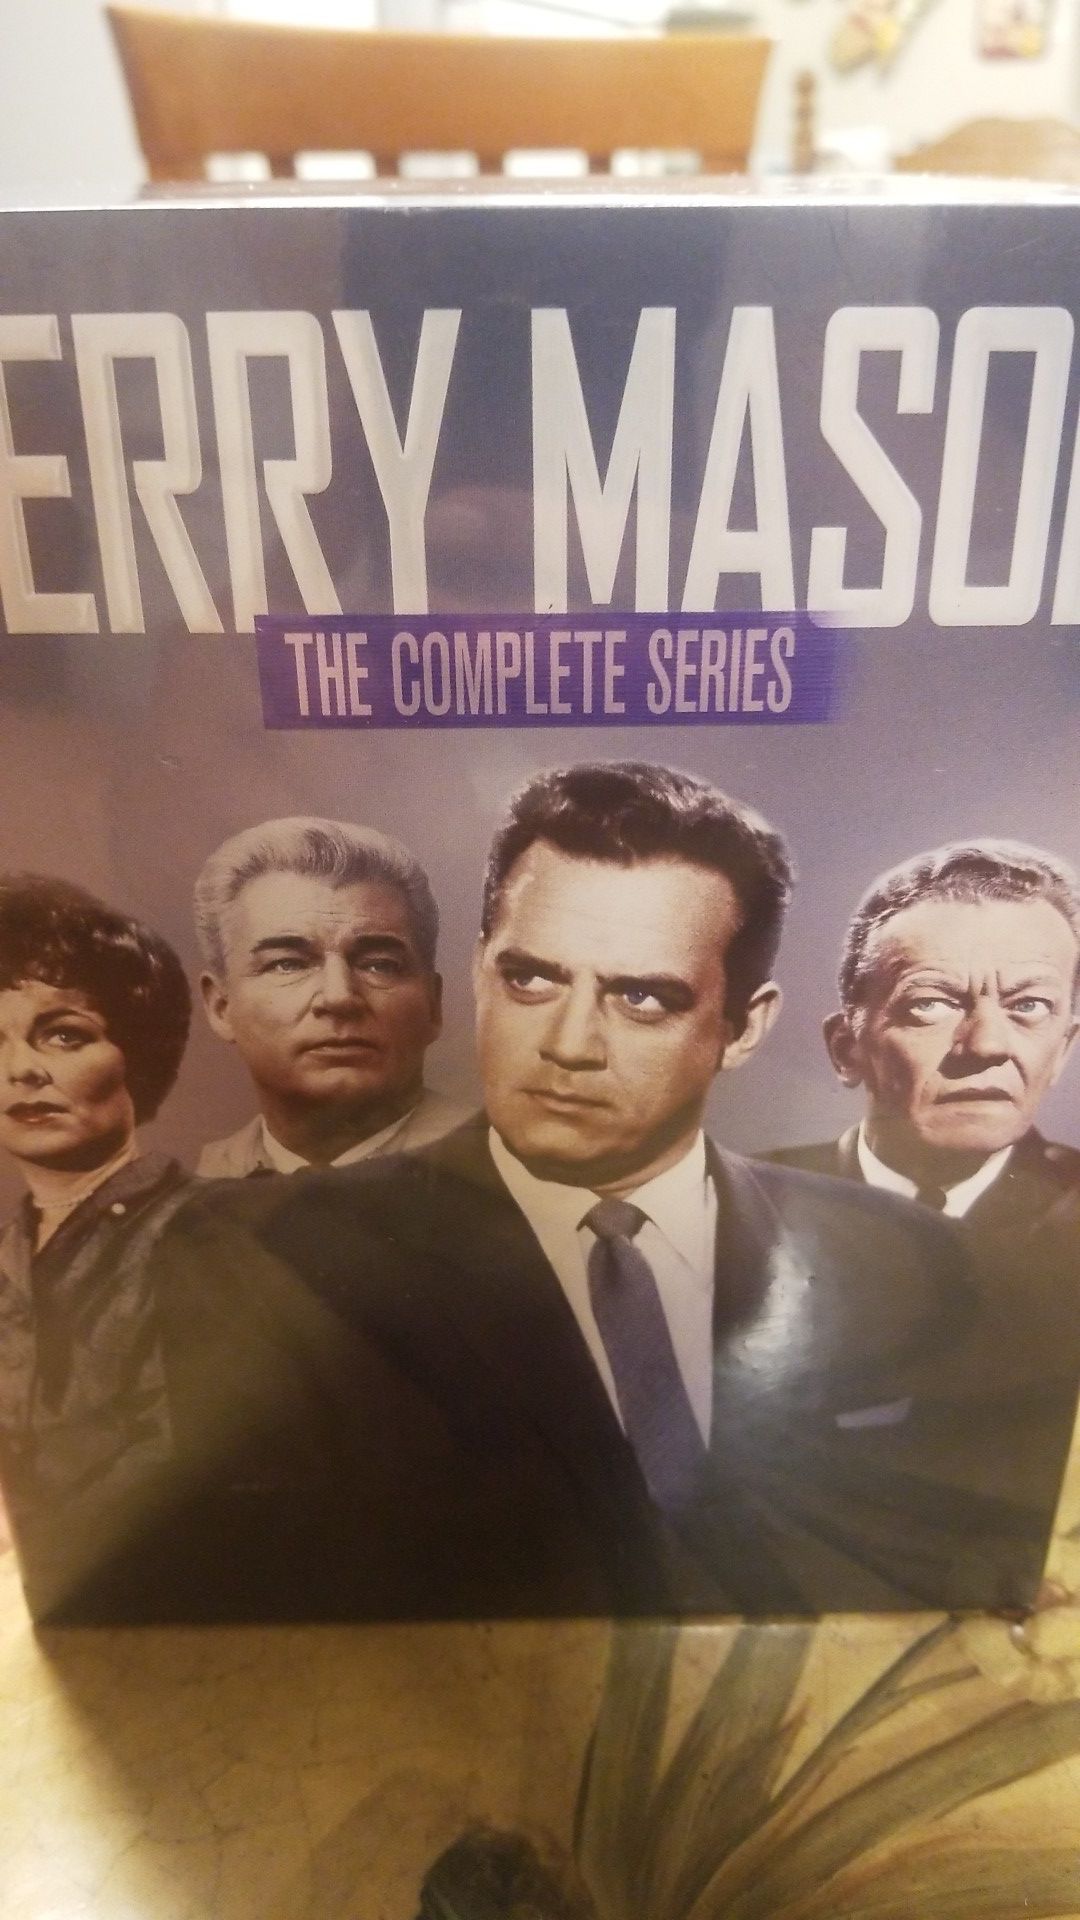 Complete Series of PERRY MASON!!